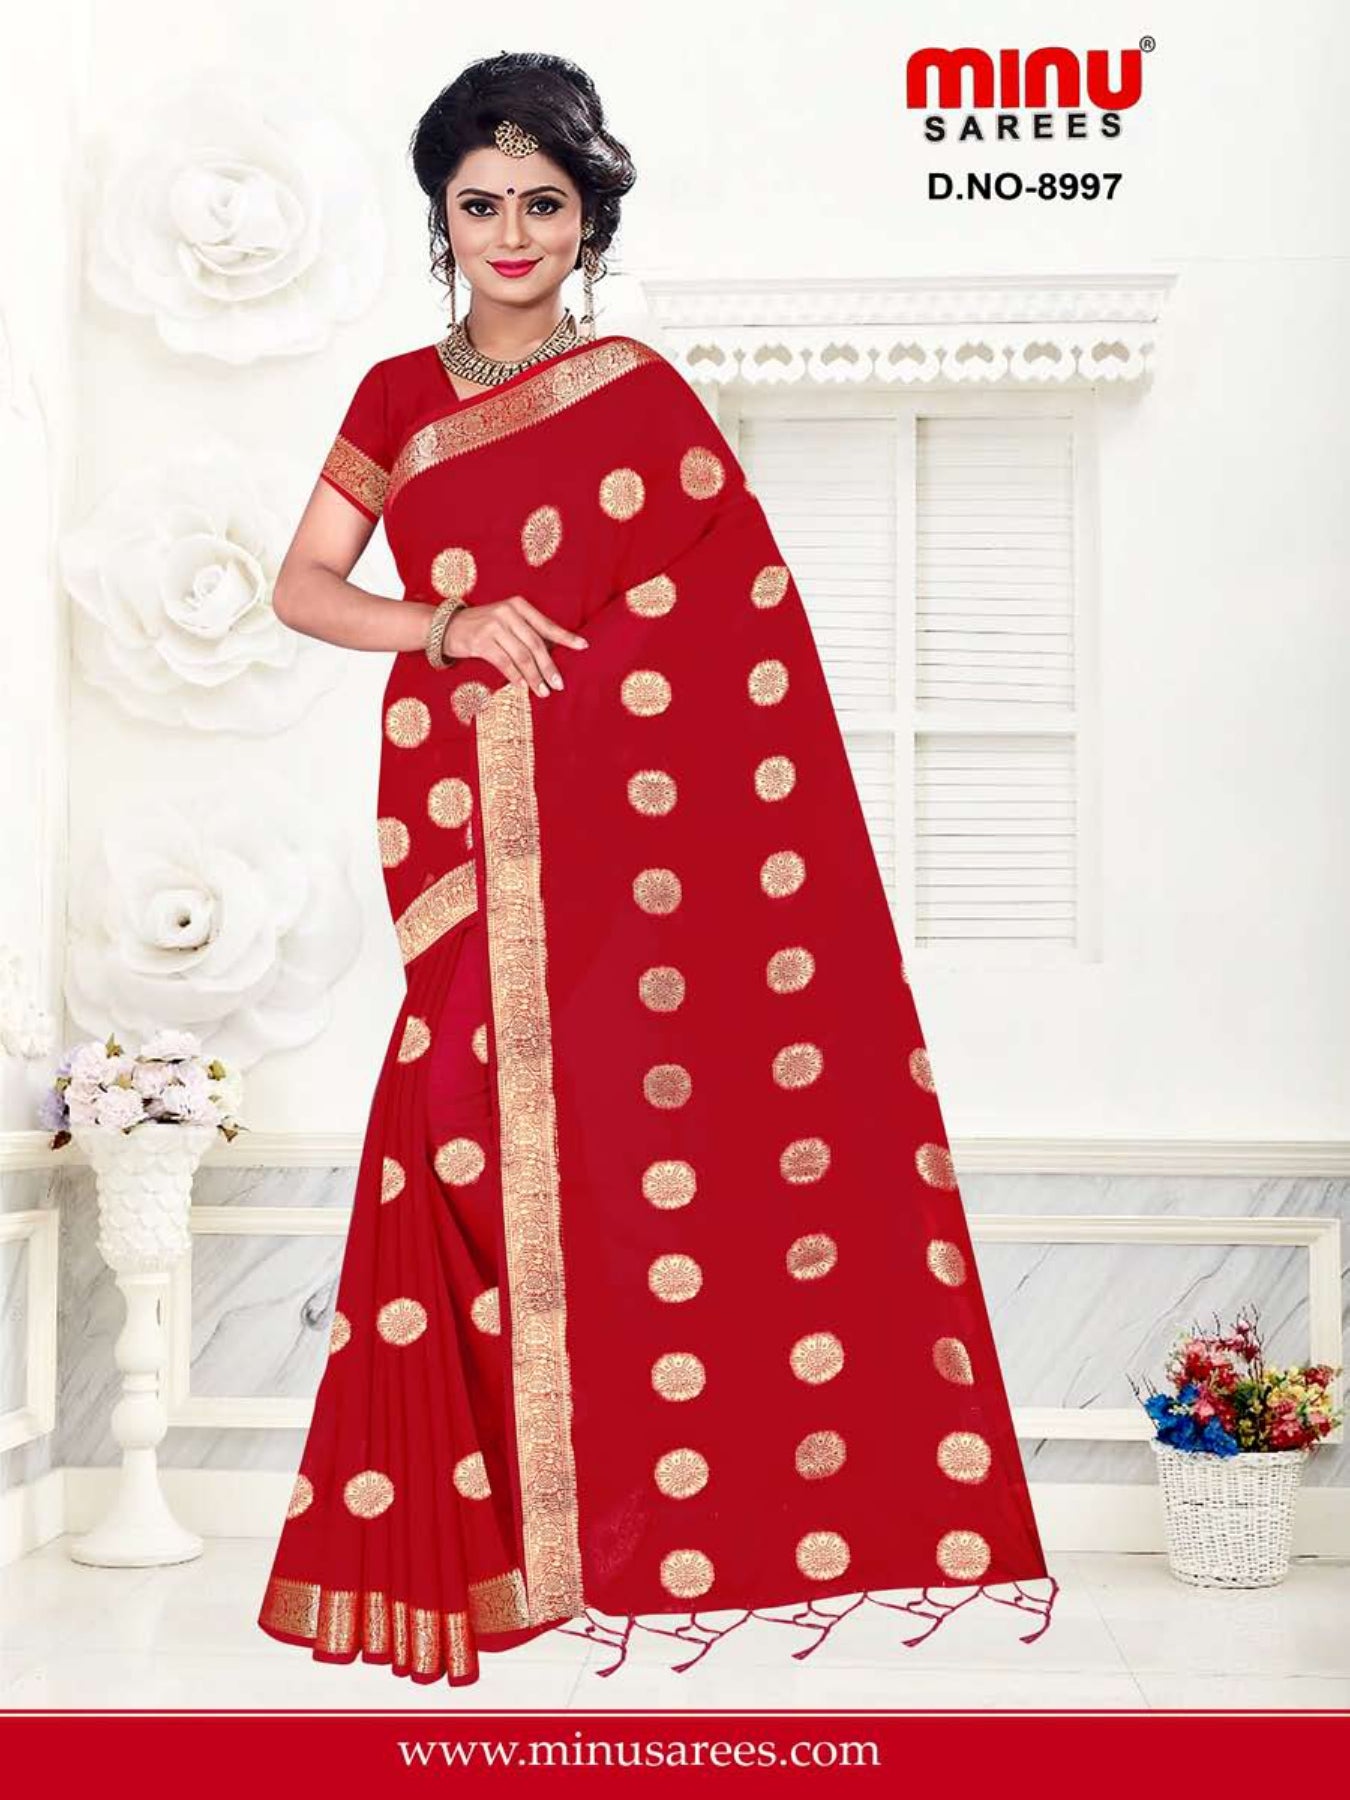 Woman wearing bold red color fancy saree image